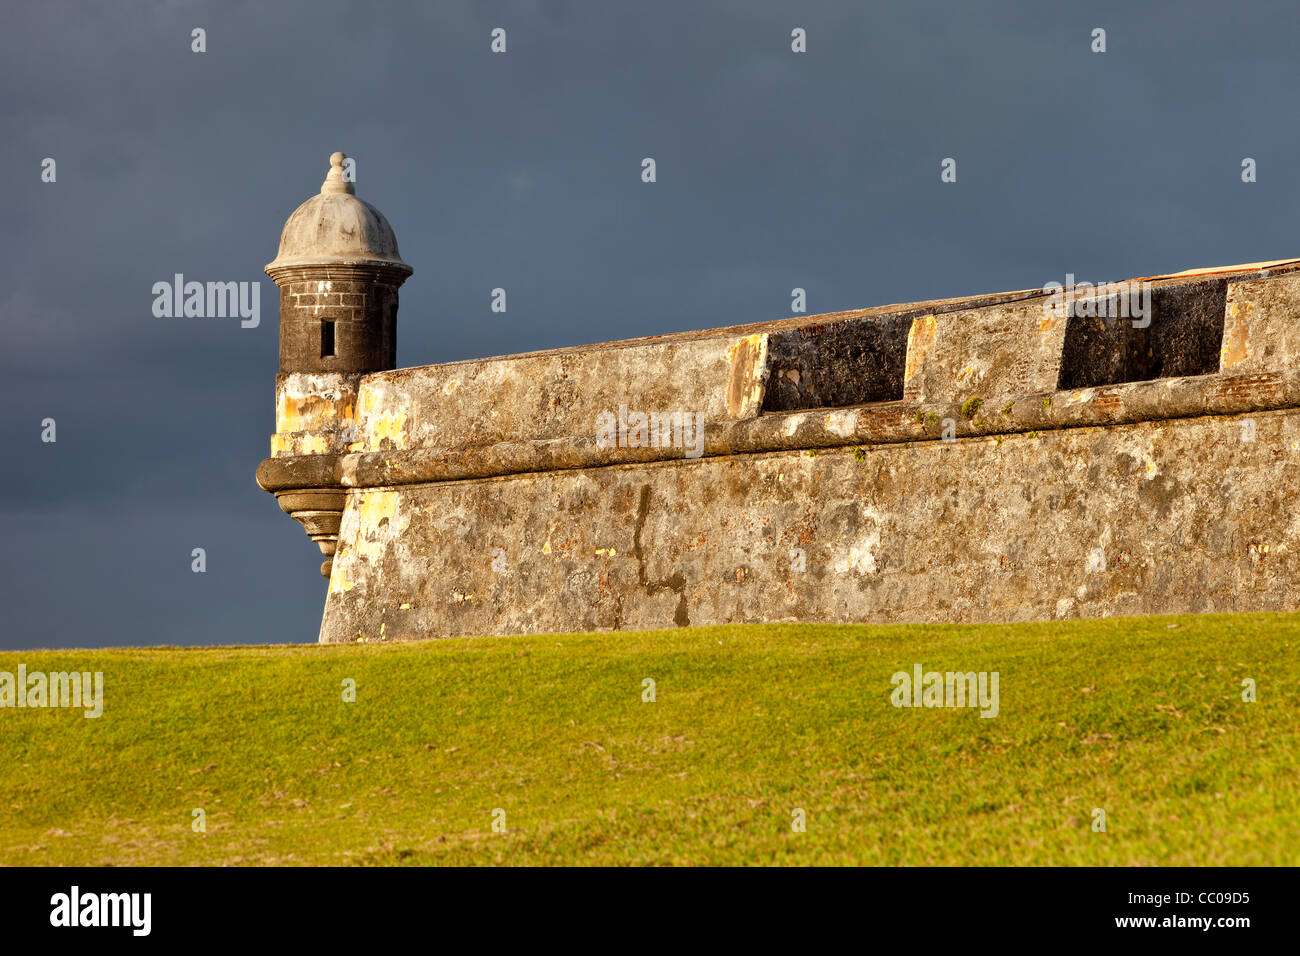 Historic Spanish fort - El Morro at the entrance to the harbor in old San Juan Puerto Rico Stock Photo